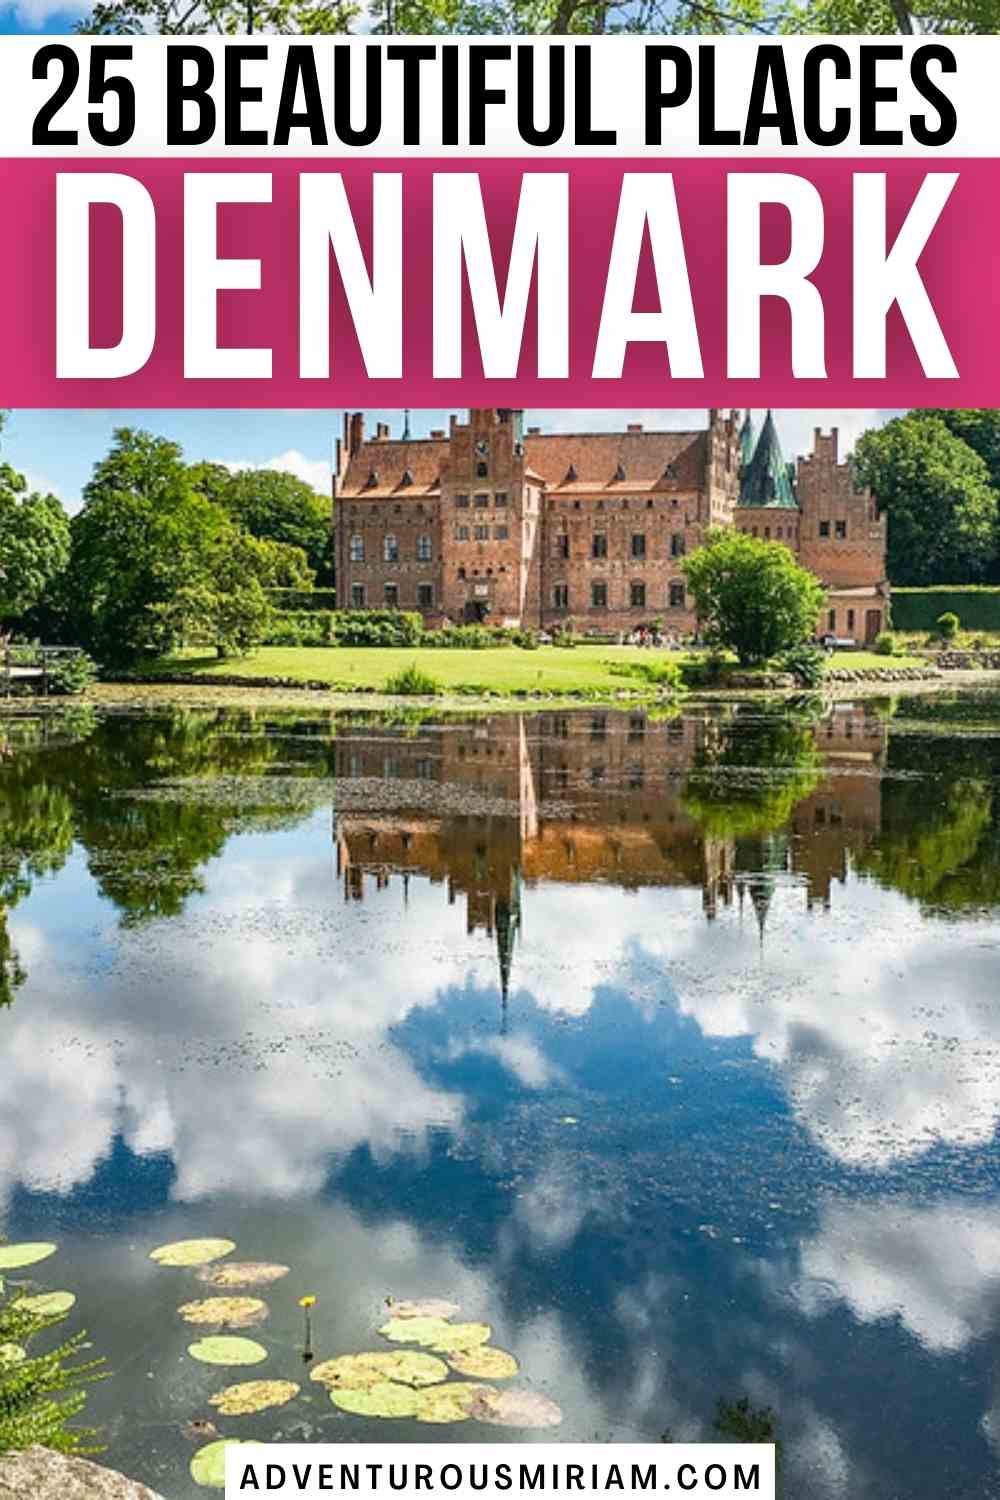 Places to visit in Denmark. Denmark travel places to visit. Denmark photography beautiful places. Denmark nature beautiful places. Denmark beautiful places. Denmark places to visit. Beautiful places in denmark. things to do in denmark bucket lists. Denmark things to do. Bucket list denmark. Travel bucket list denmark. Visit denmark bucket lists. 